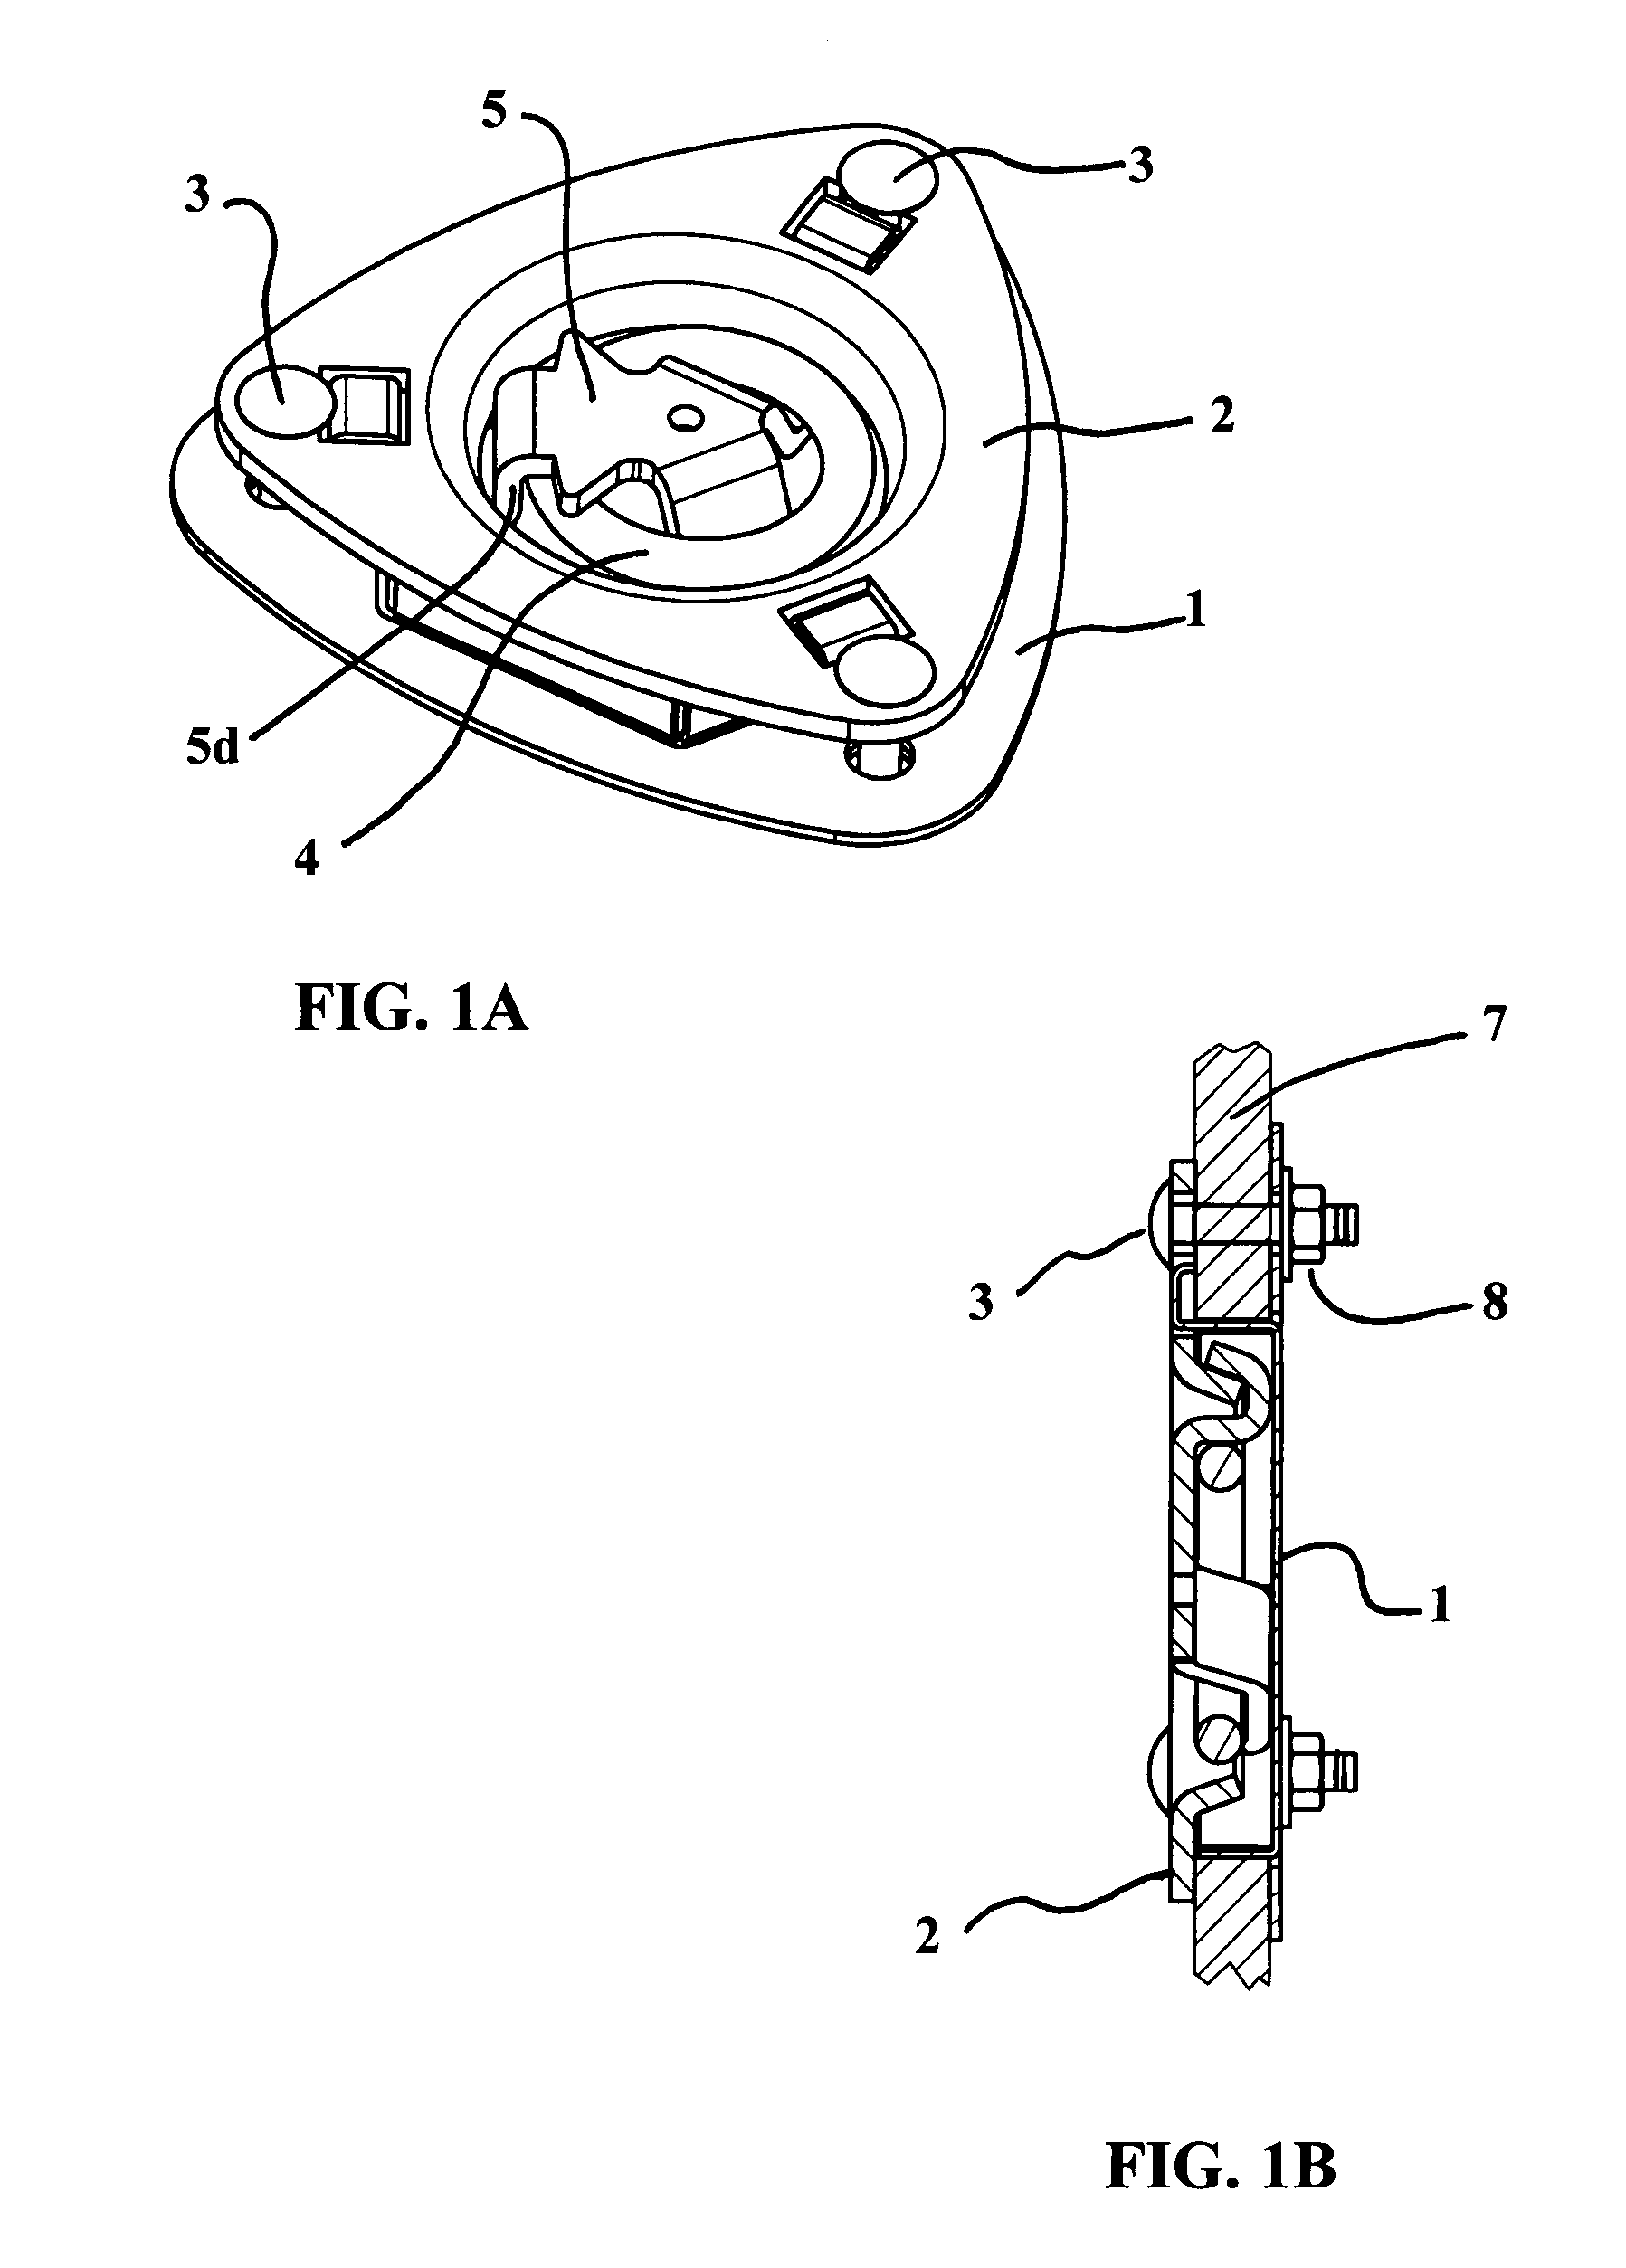 Tie-down anchor system and method